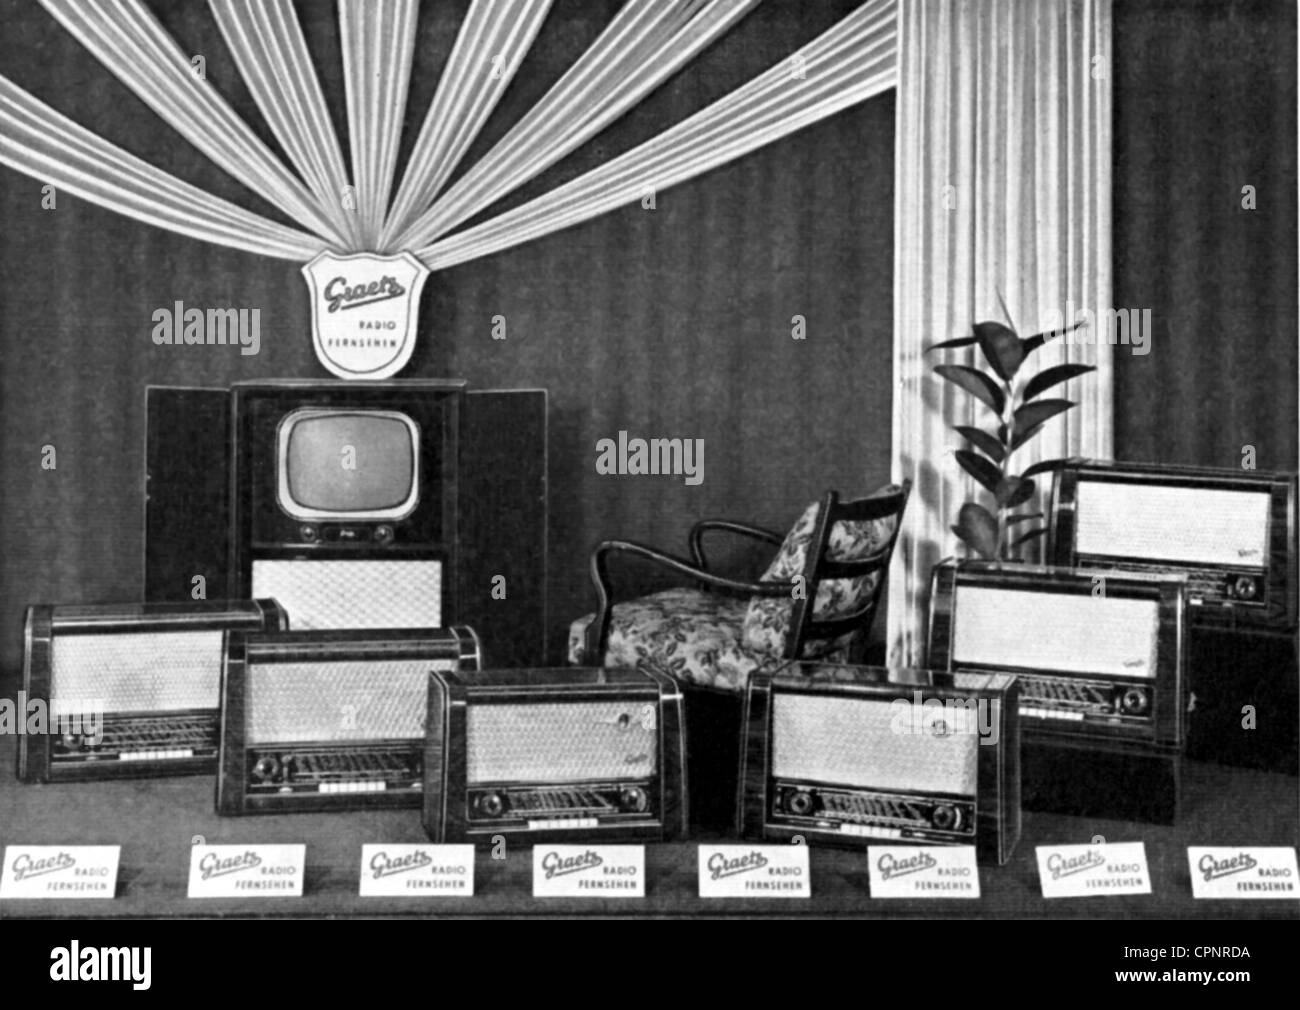 broadcast,television,television set,shop window of a radio- and television shop,with the latest sets of the Graetz Company,also television set F 10,television console with closeable blinds,proposition of a ideal shop window decoration of the Graetz Company for their customers,Germany,1953,window dressing,window dressings,window display,presentation of goods,sale,sales,retail trade,retailing,retail and wholesale,retail,broadcasting services,radio shop,radio shops,broadcast trade,TV history,economic miracle,economic miracles,50s,store ,Additional-Rights-Clearences-Not Available Stock Photo